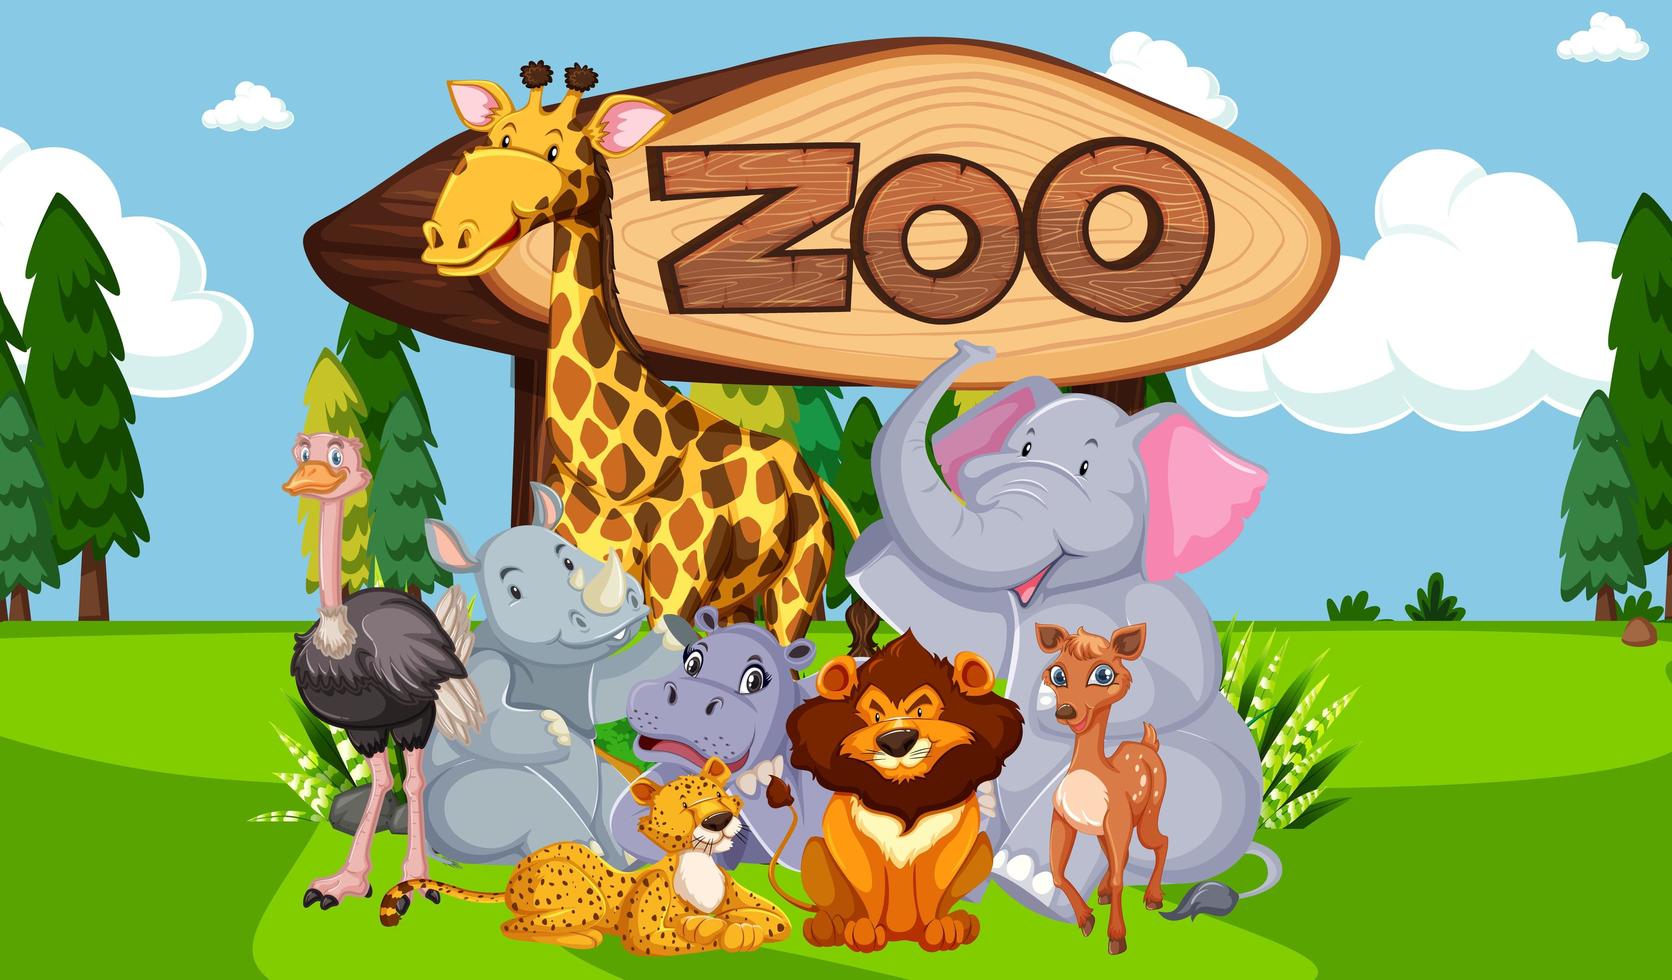 Group of animals with zoo sign vector